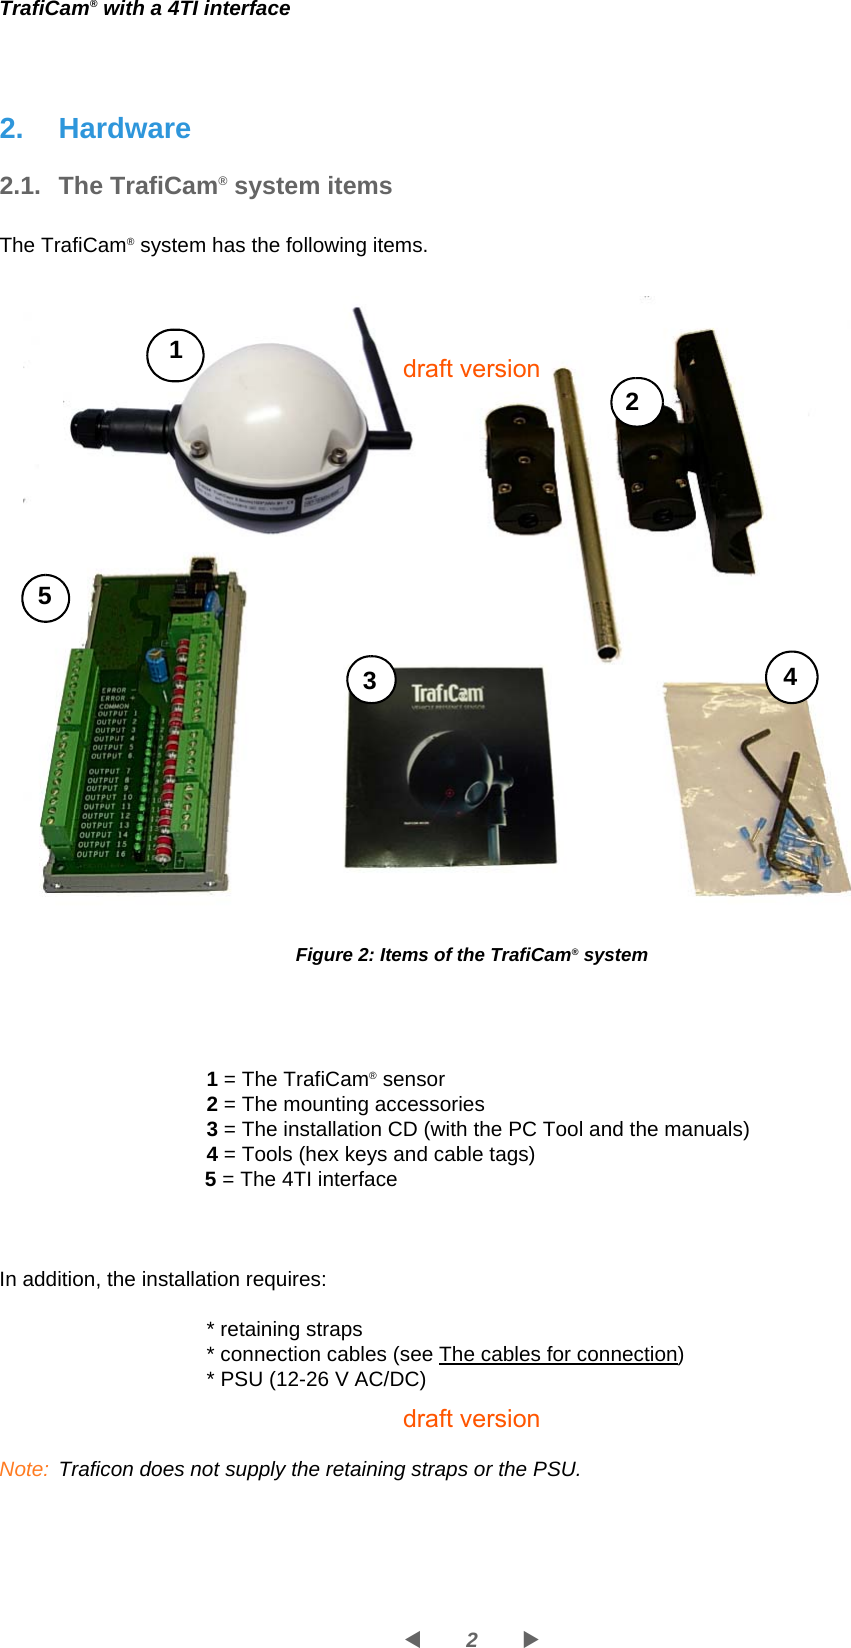 2WXTrafiCam® with a 4TI interface2. Hardware2.1. The TrafiCam® system itemsThe TrafiCam® system has the following items.Figure 2: Items of the TrafiCam® system1 = The TrafiCam® sensor2 = The mounting accessories3 = The installation CD (with the PC Tool and the manuals)4 = Tools (hex keys and cable tags)5 = The 4TI interfaceIn addition, the installation requires:* retaining straps* connection cables (see The cables for connection)* PSU (12-26 V AC/DC)Note: Traficon does not supply the retaining straps or the PSU.15234draft versiondraft version